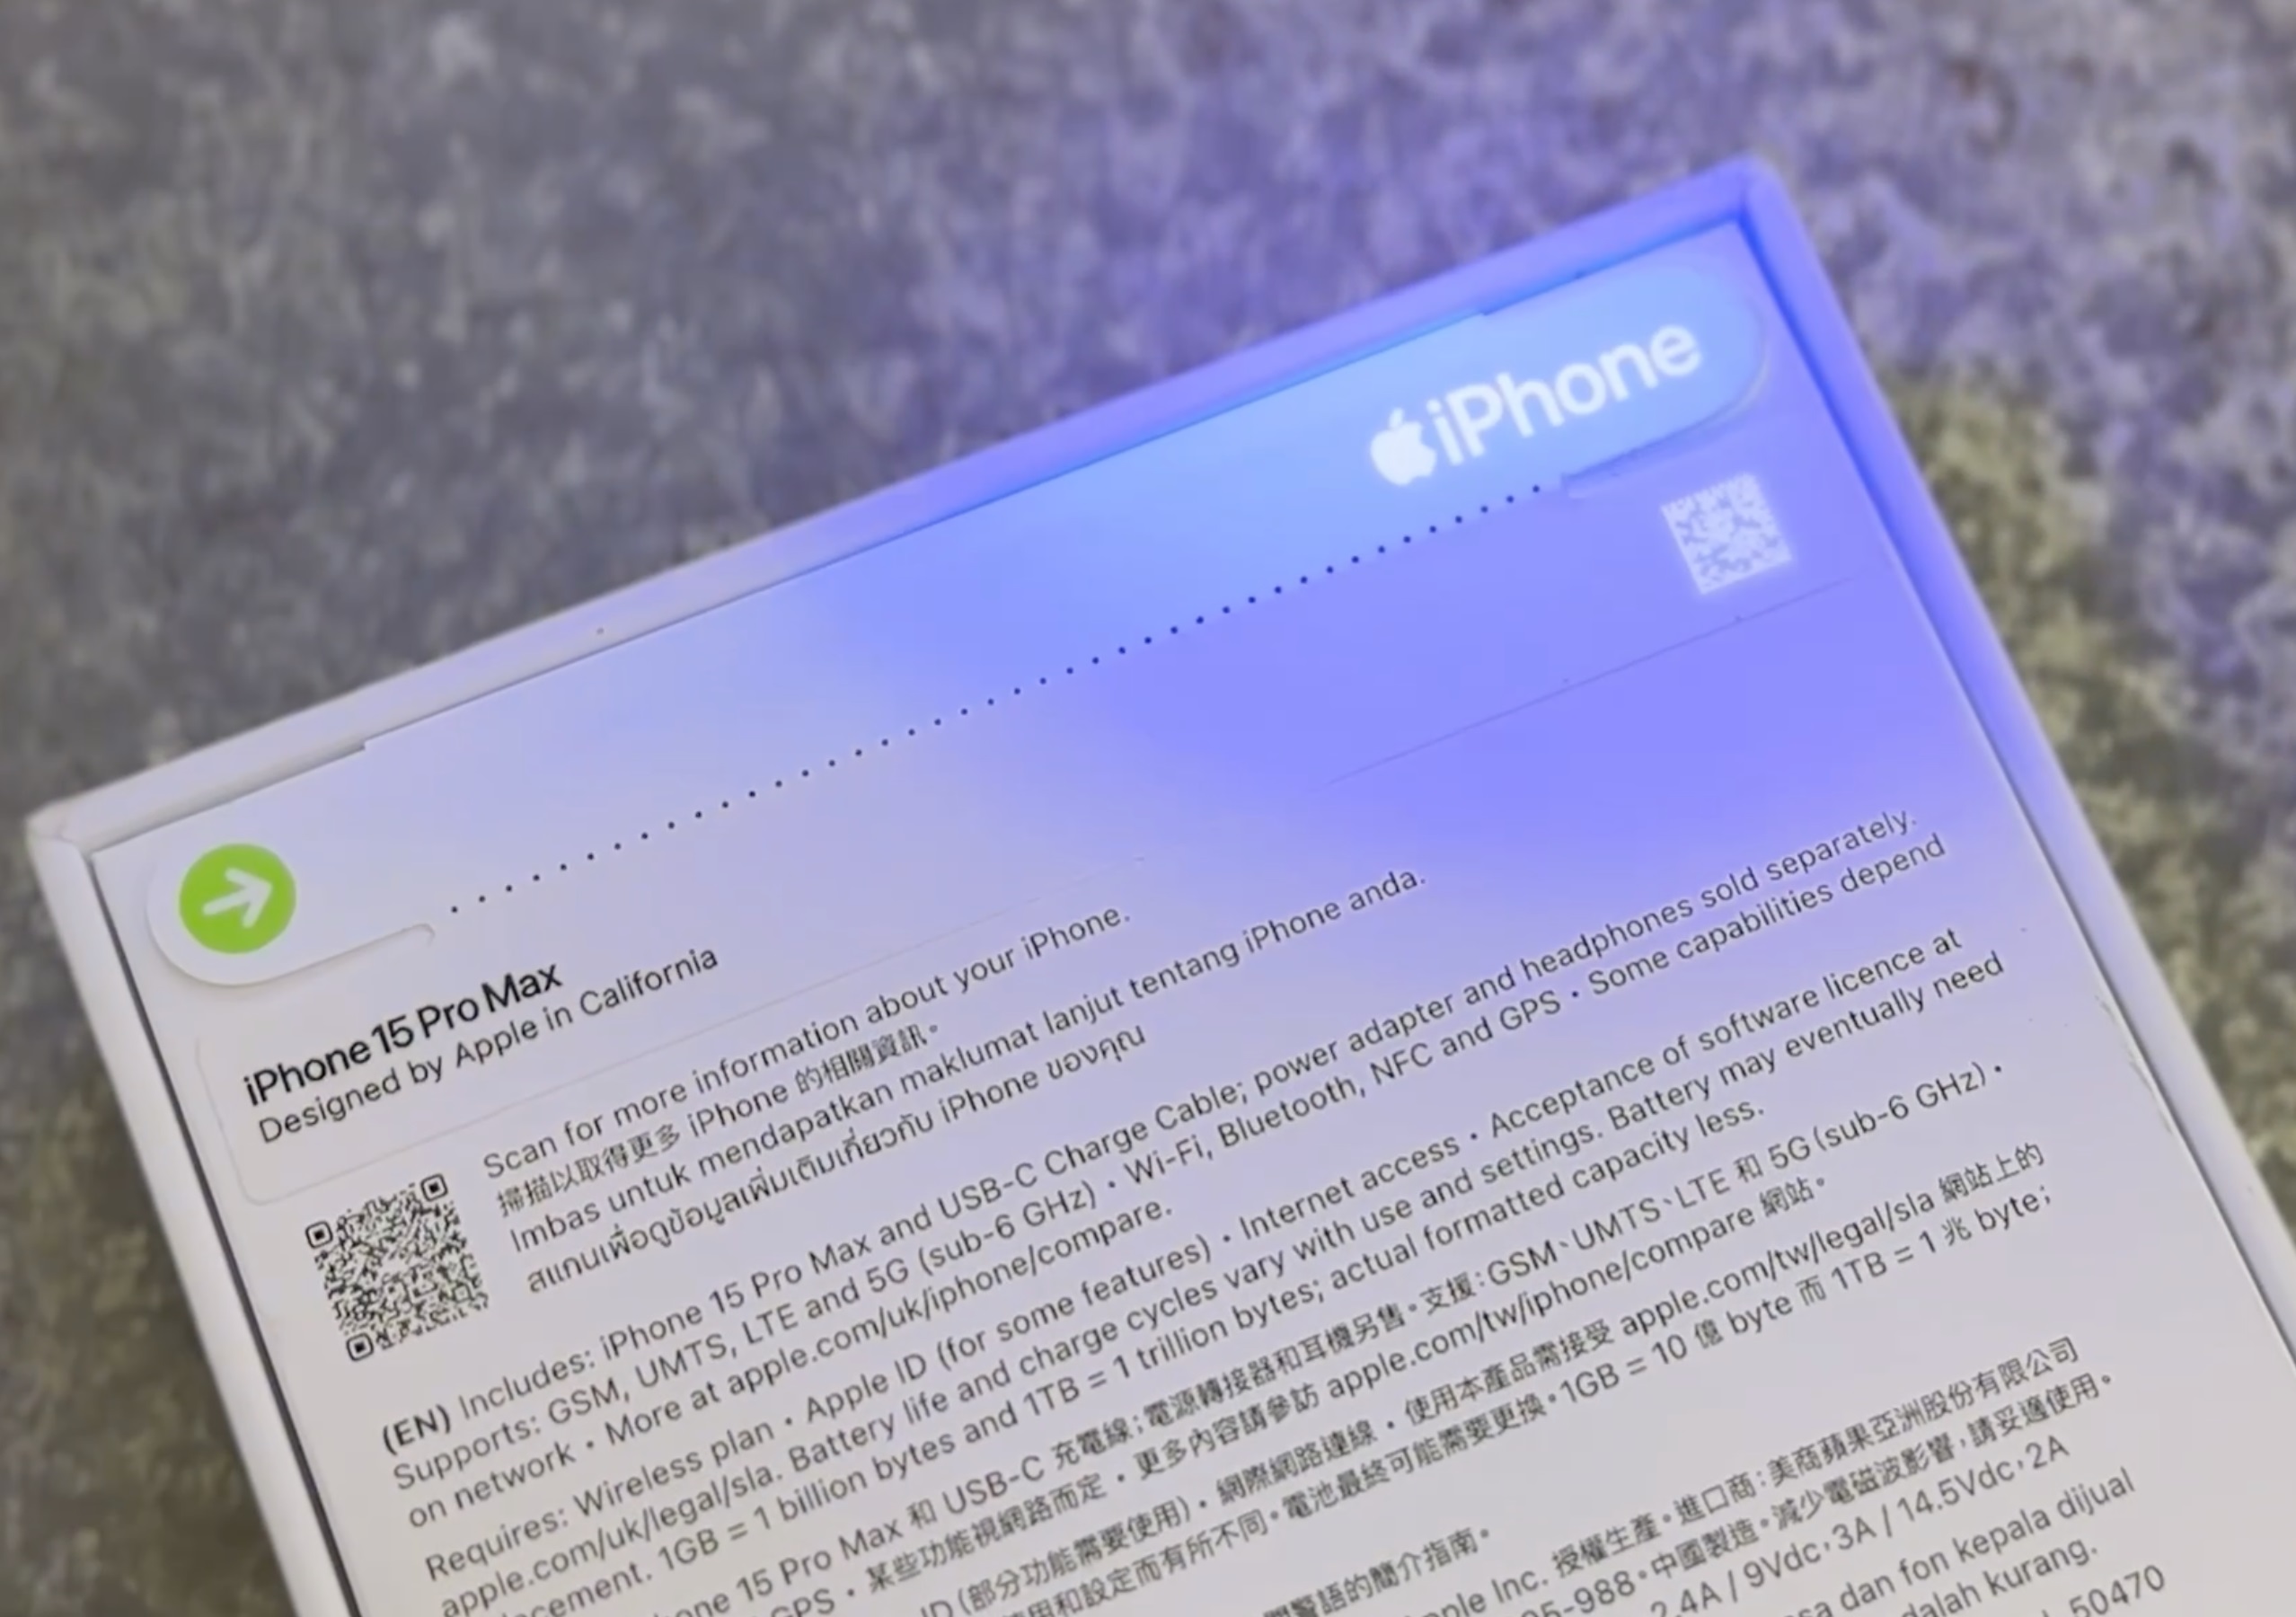 There are special codes on the iPhone 15 packaging that are only visible under UV light